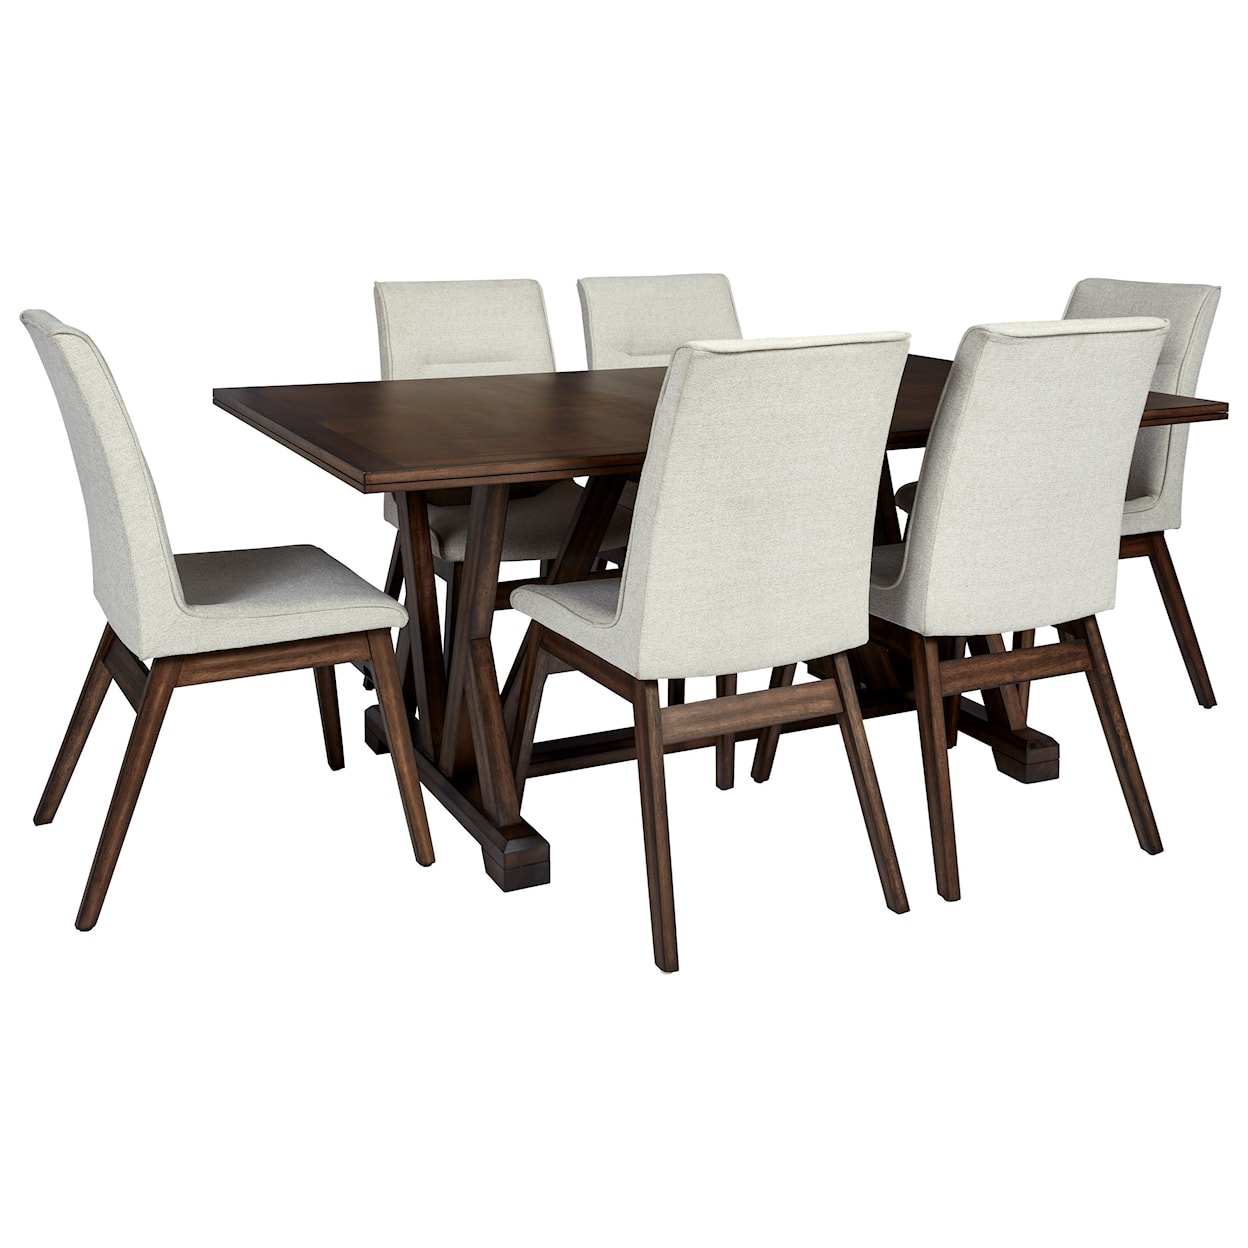 Carolina Chairs Mimosa 7-Piece Table and Chair Set